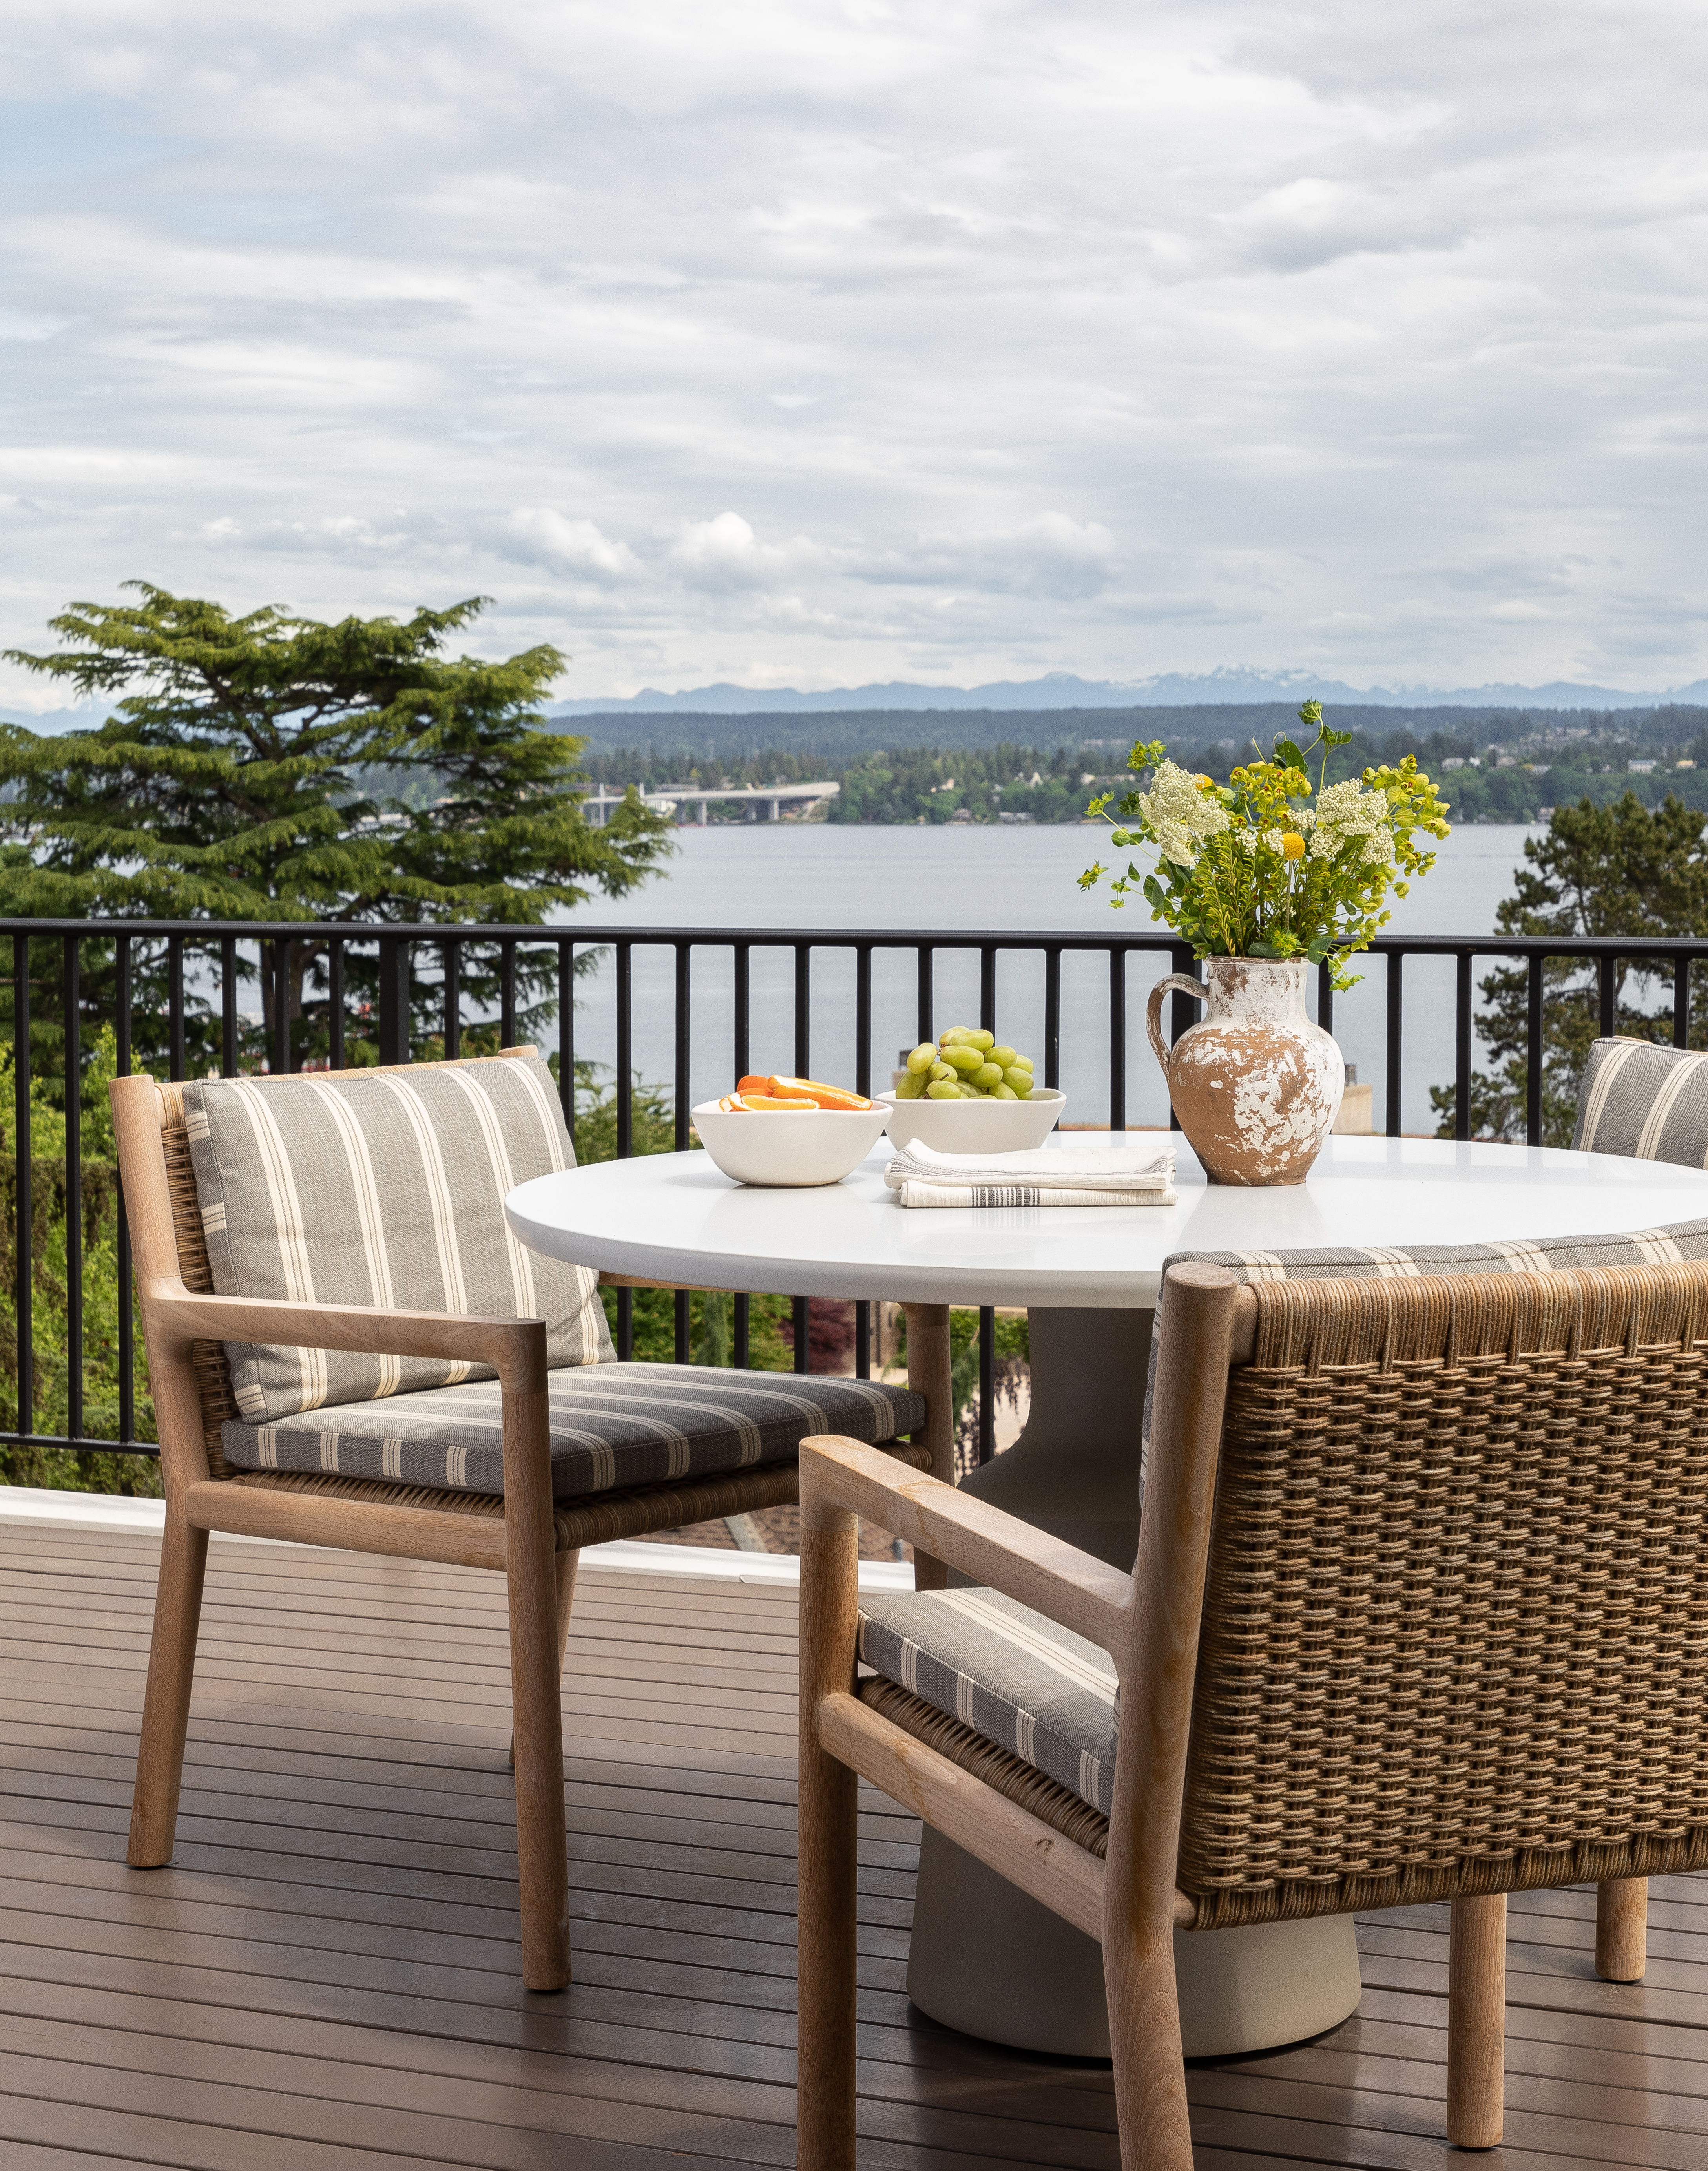 The waterfront side of the house boasts a dining table ideal for enjoying coffee with a stunning view.